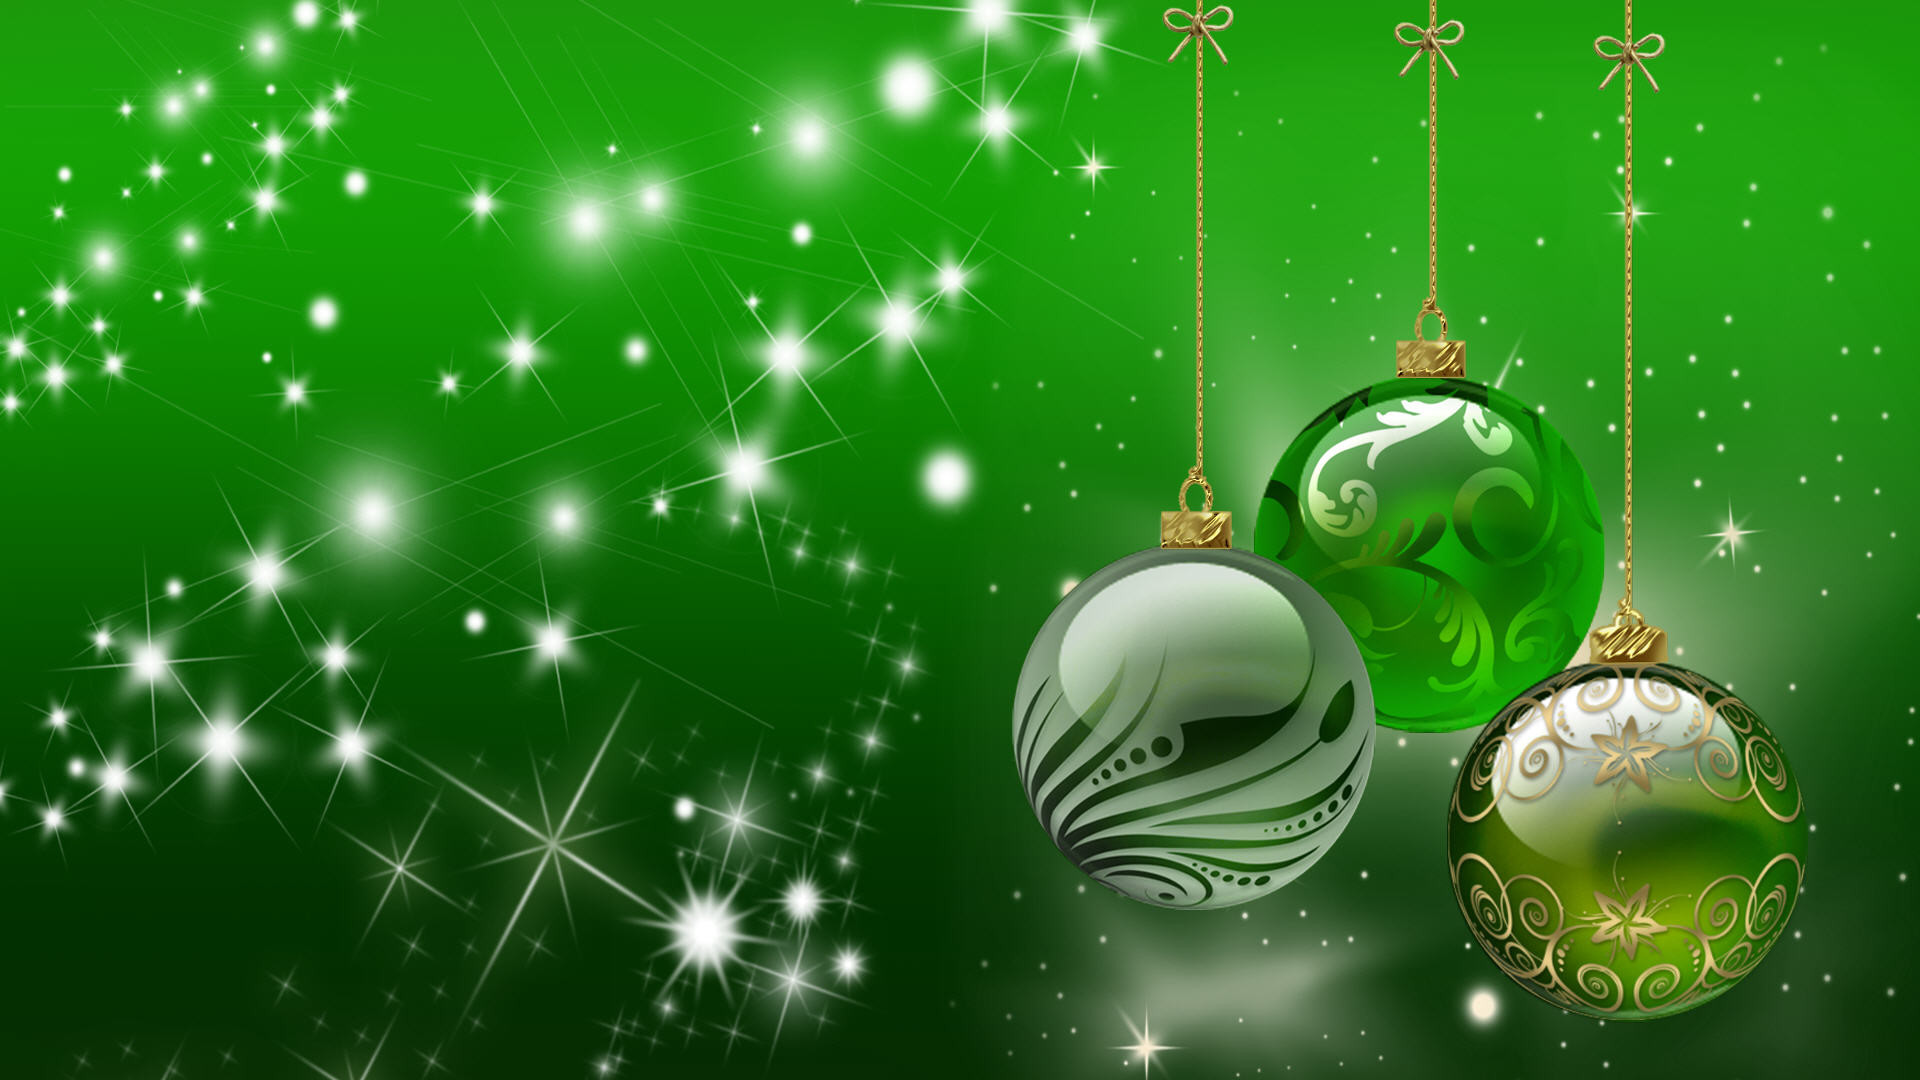 1920x1080 Christmas Holiday Wallpaper Backgrounds